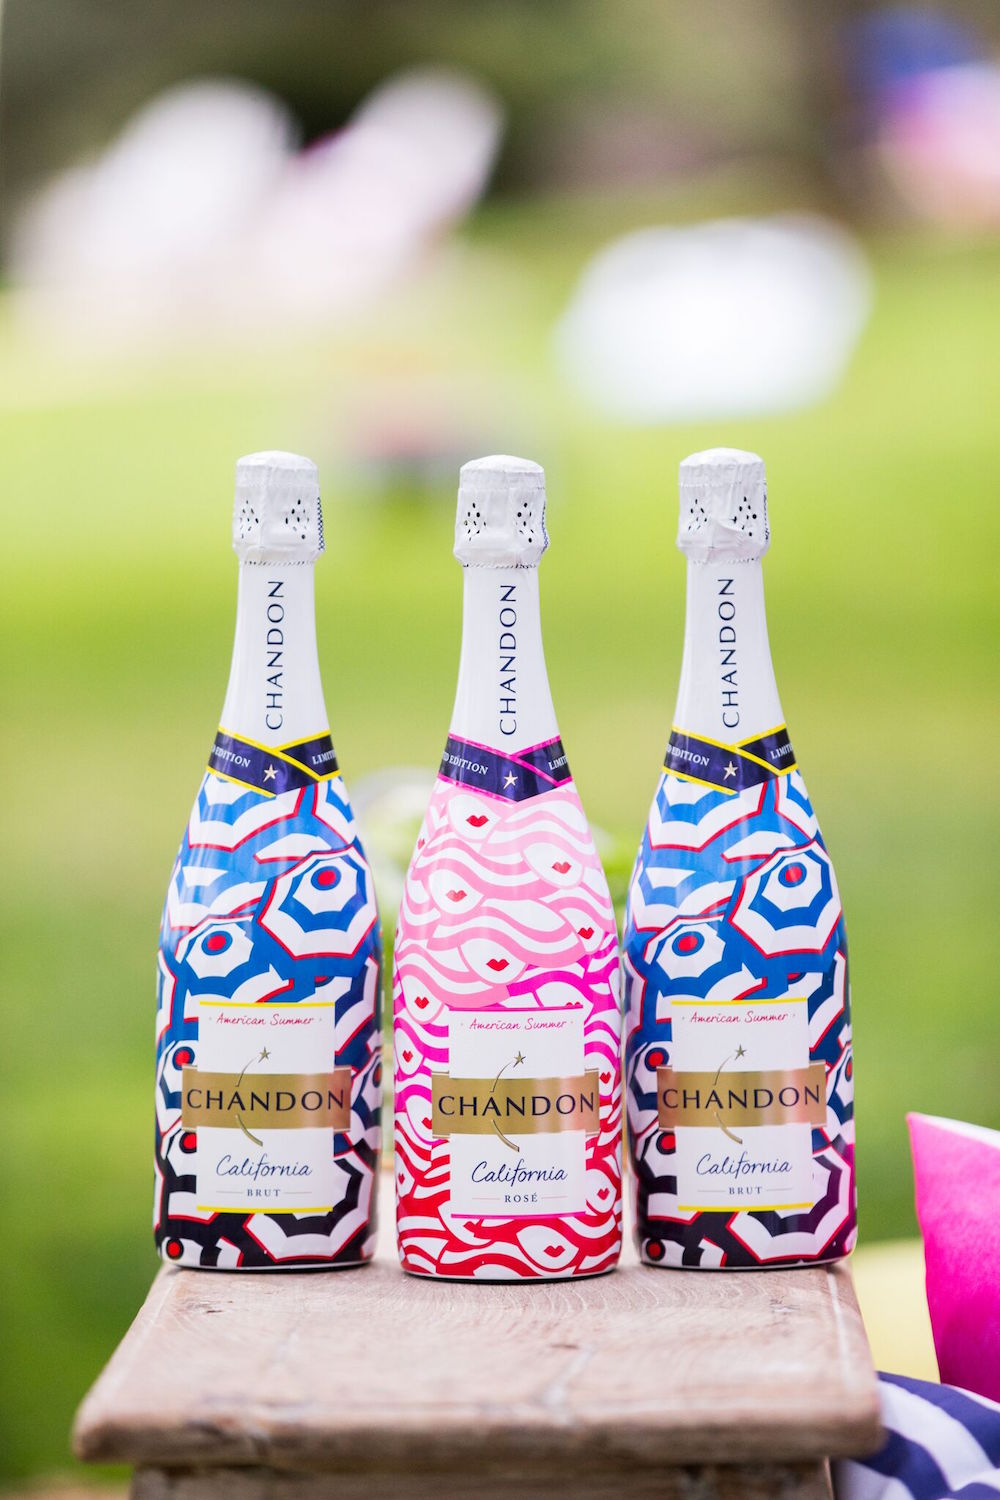 BUY] Domaine Chandon  Brut Rose American Summer Limited Edition - NV at